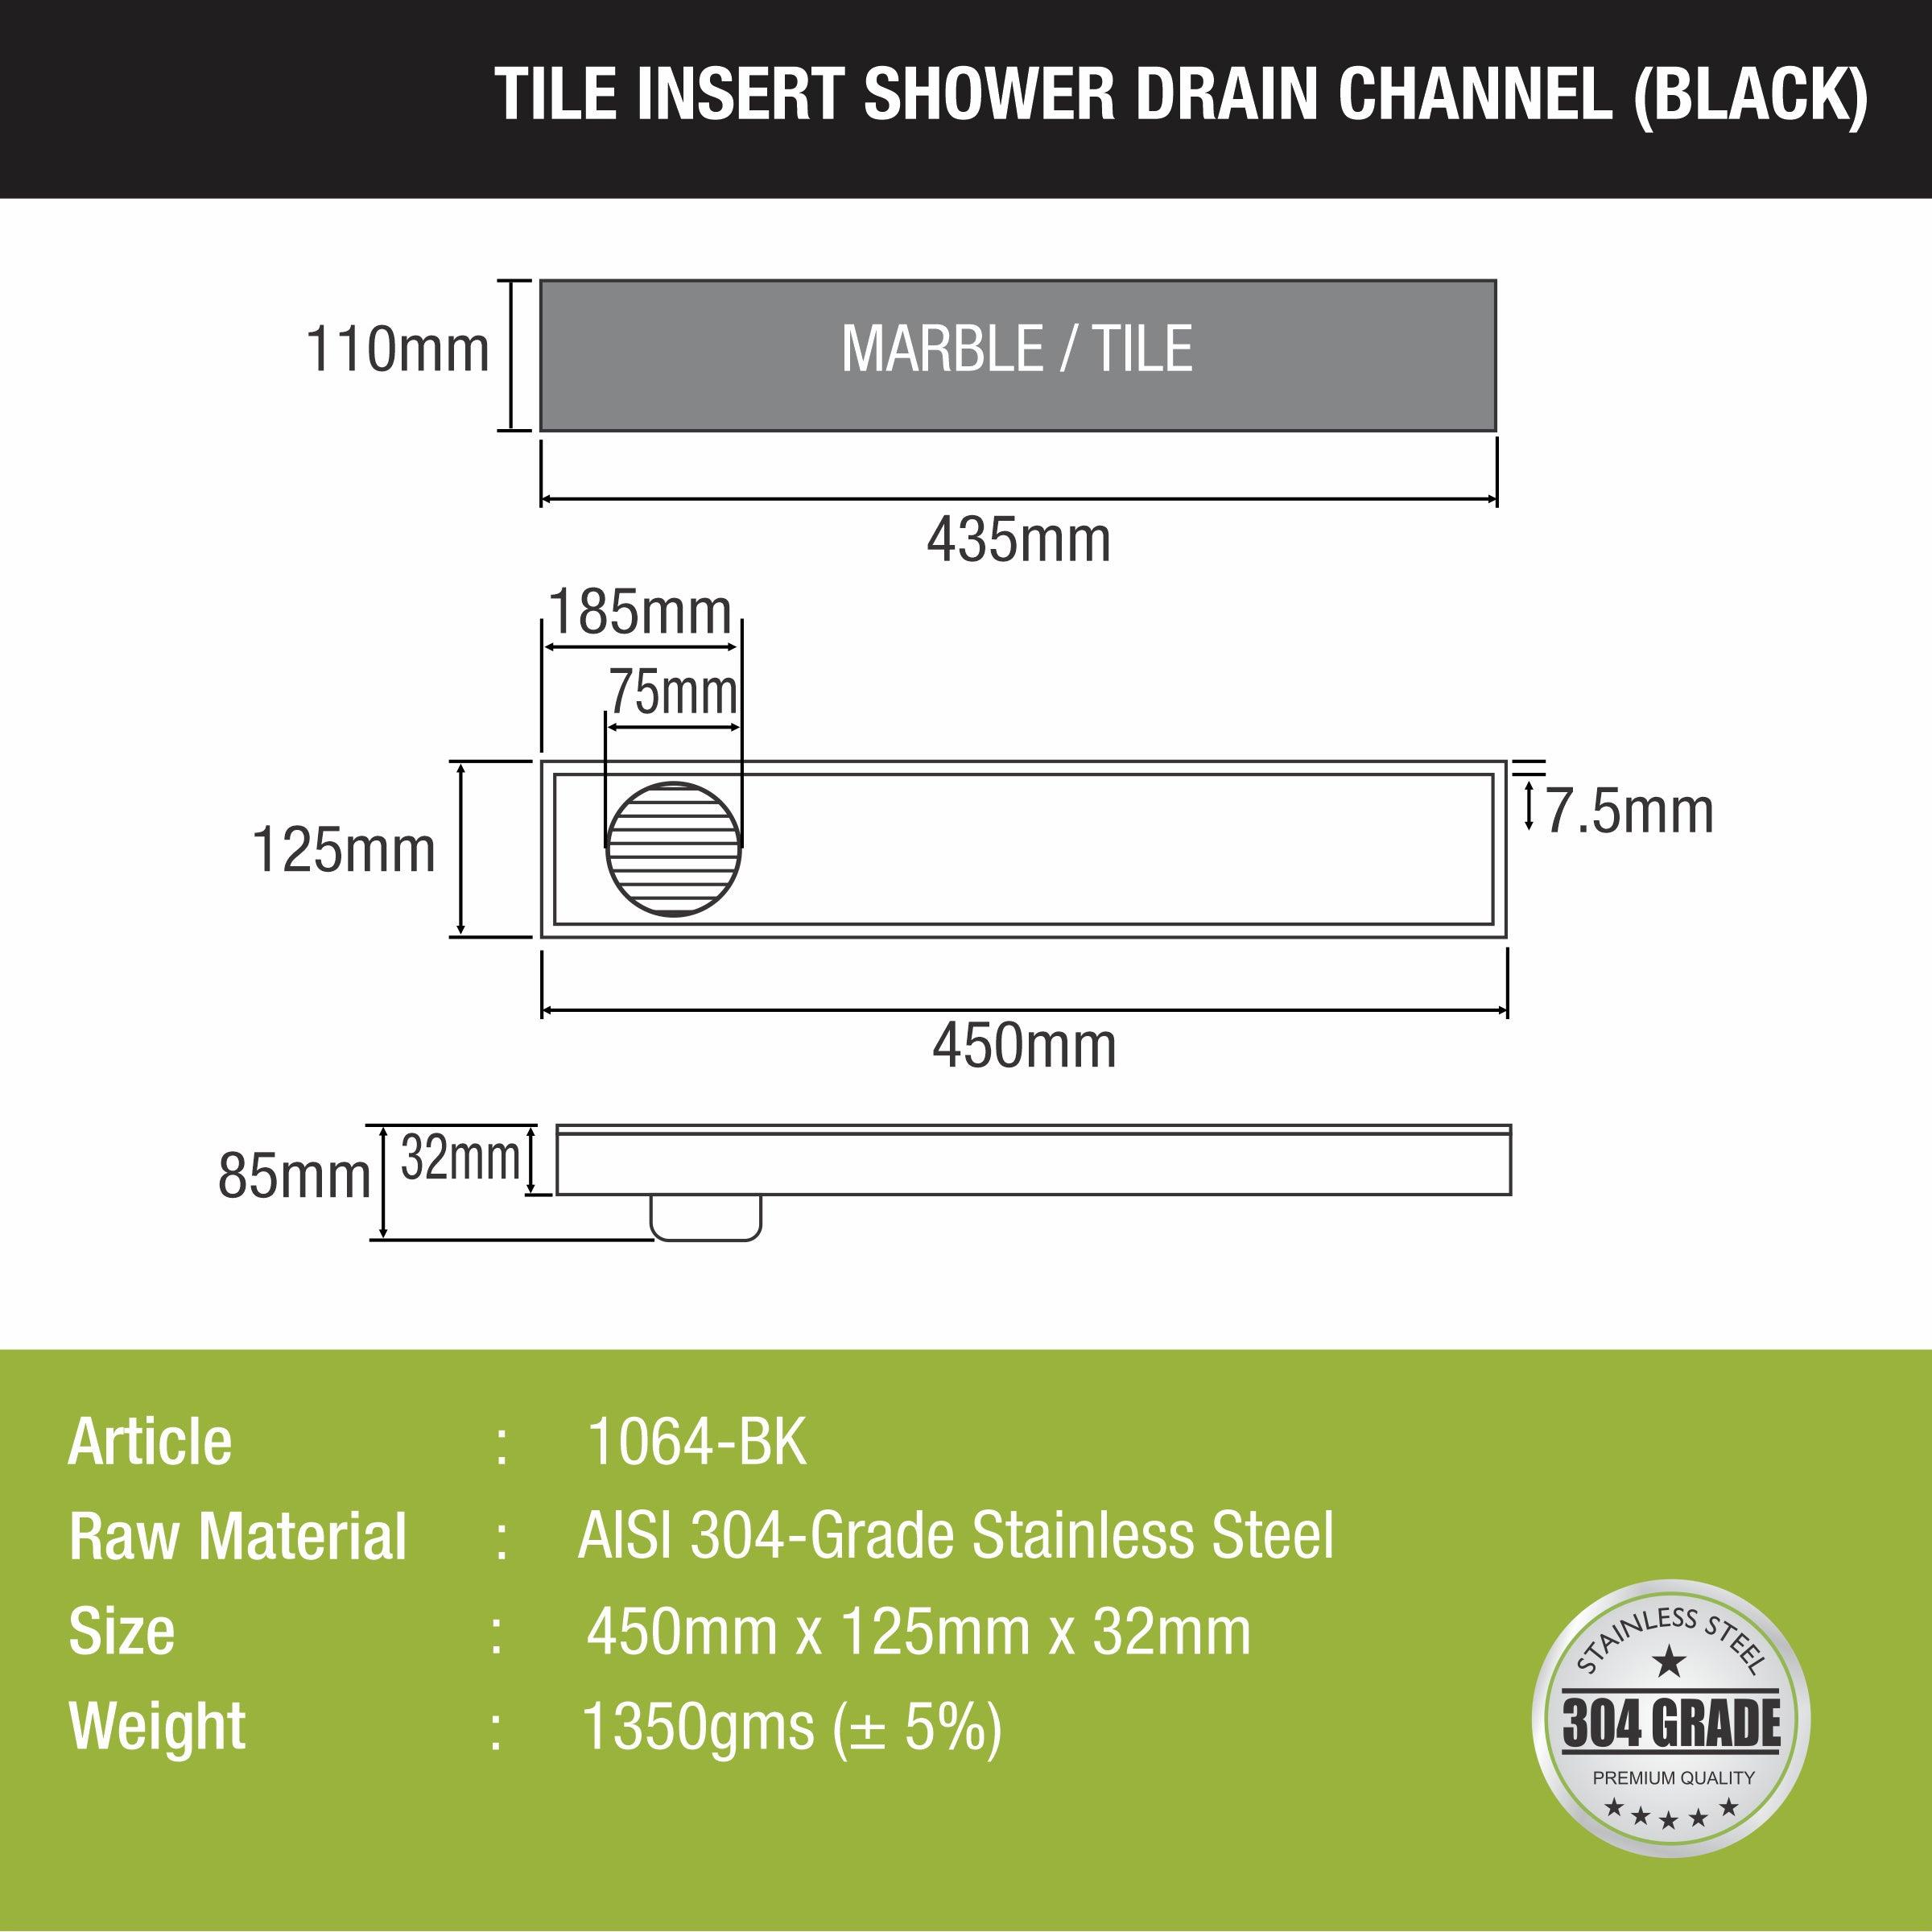 Tile Insert Shower Drain Channel - Black (12 x 5 Inches) size and measurement